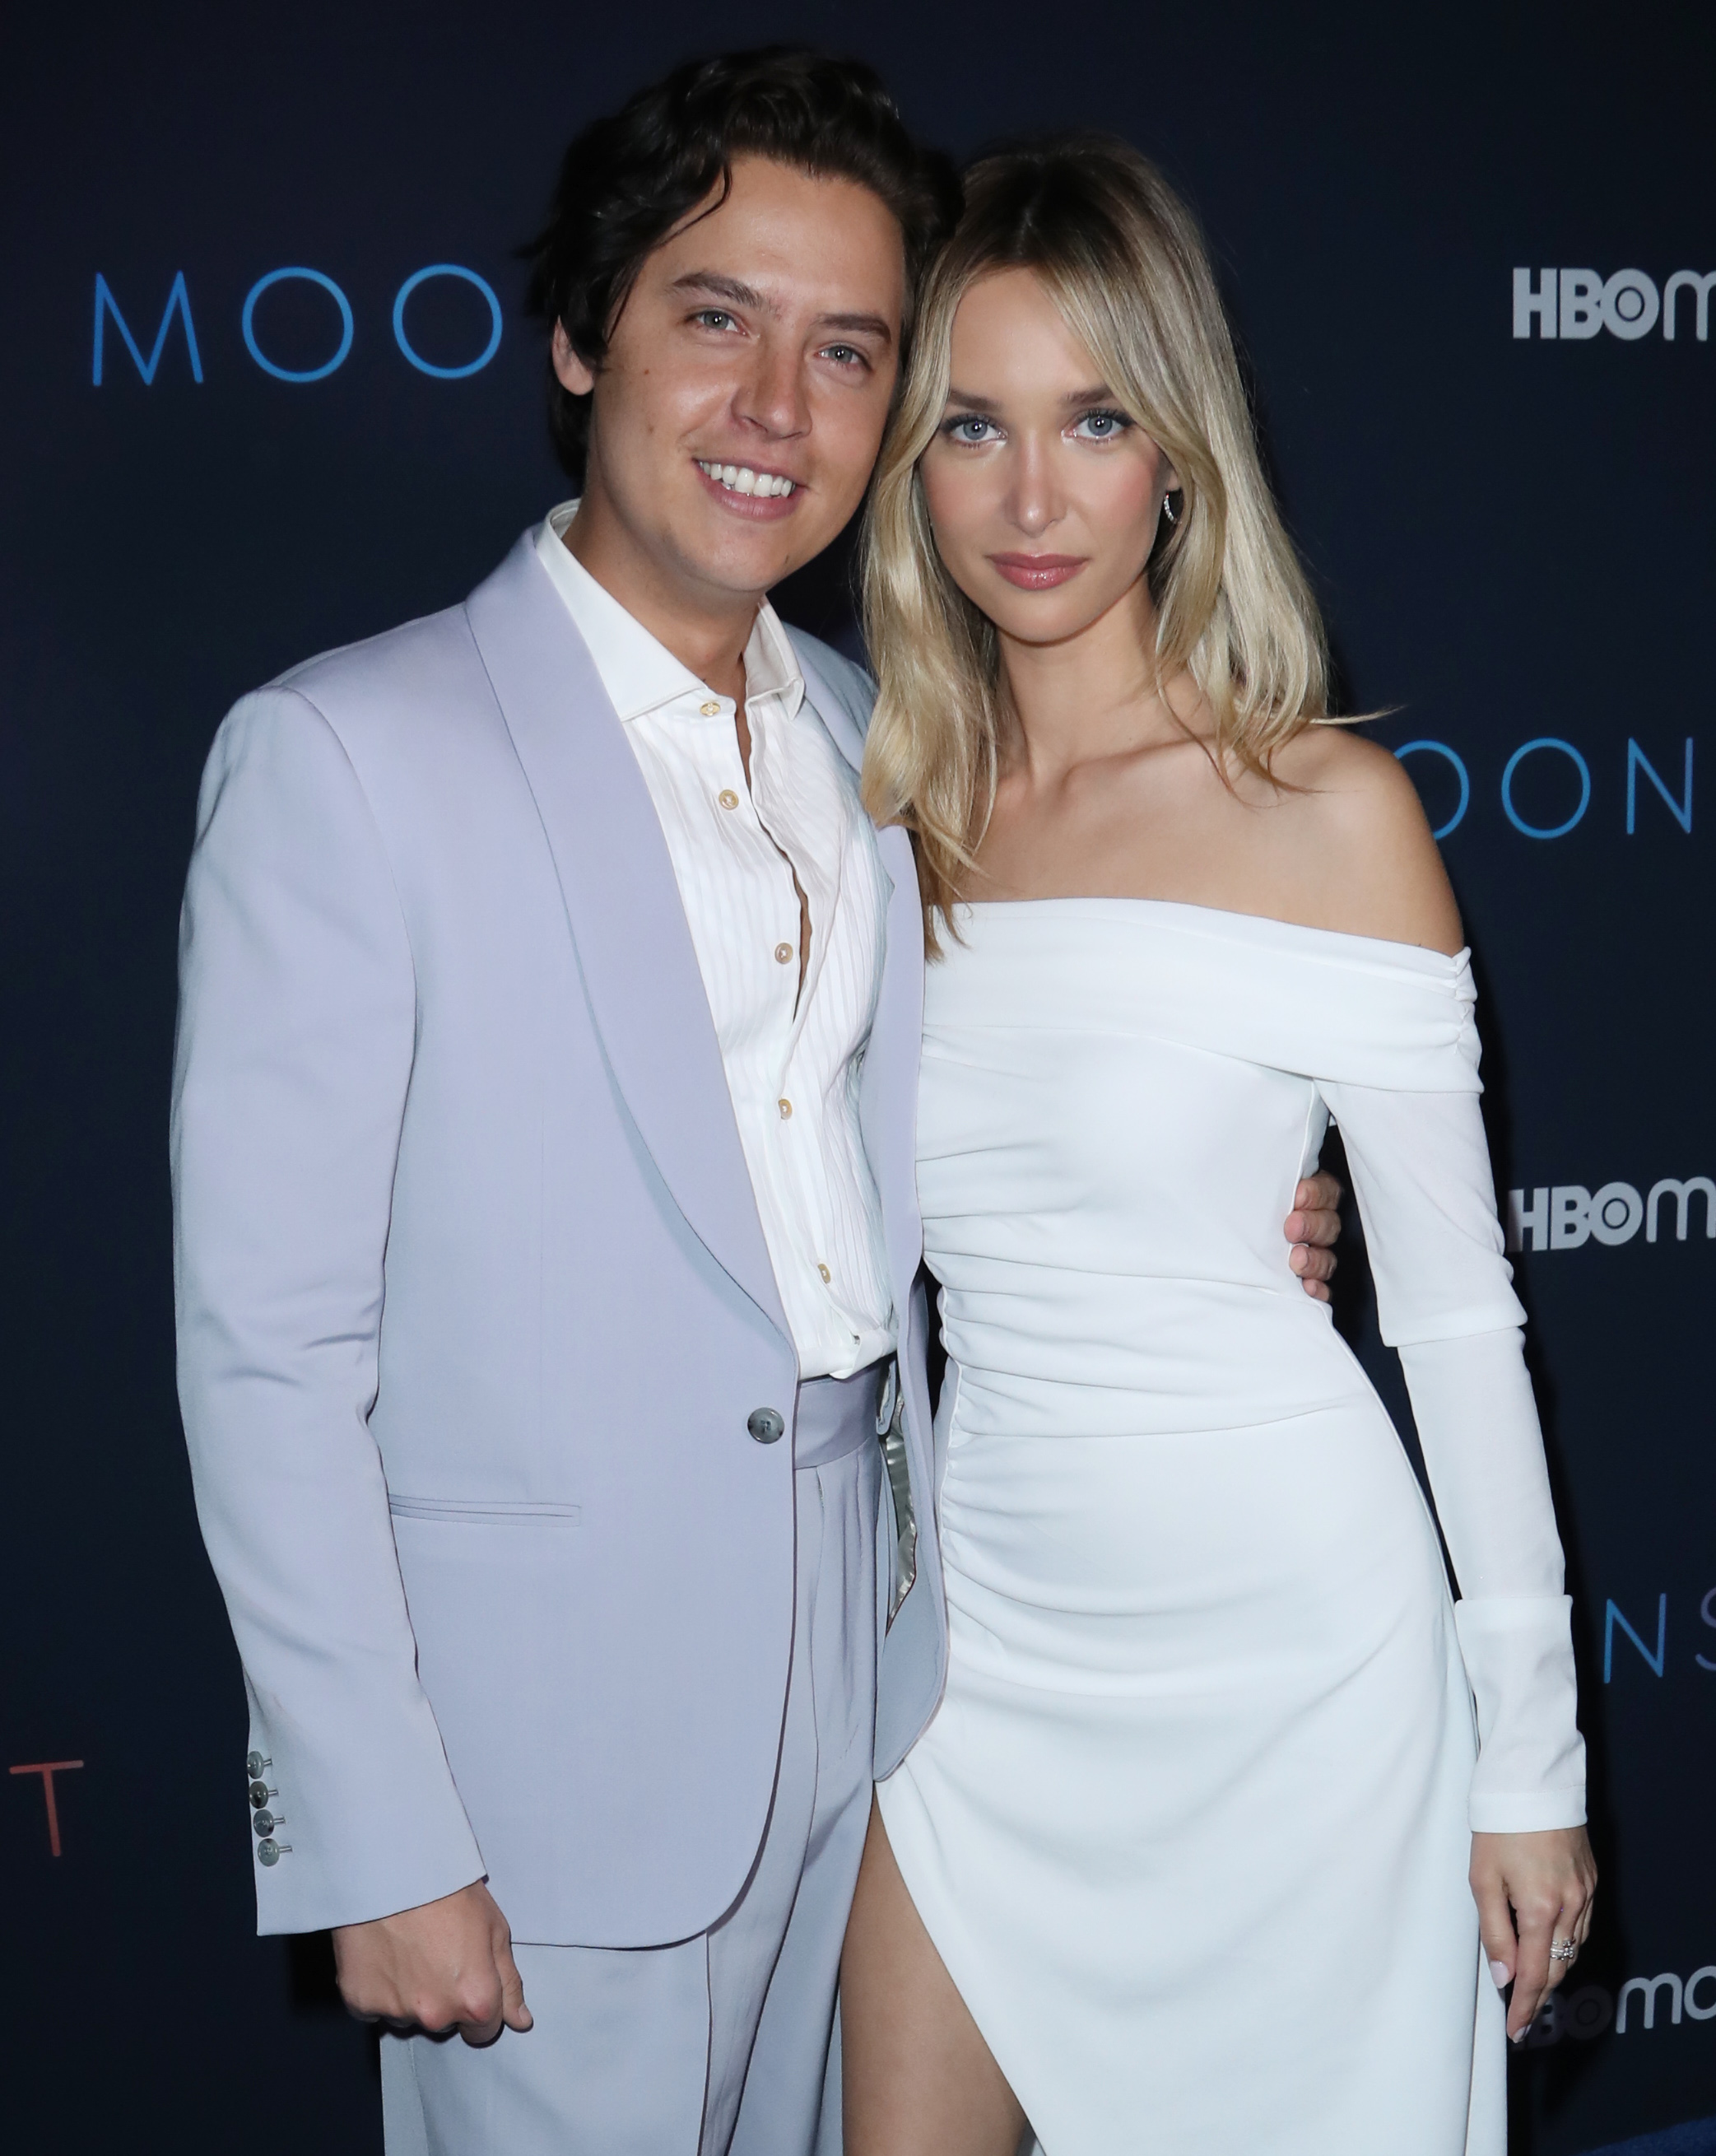 Cole Sprouse Talks Disney Love and Lili Reinhart on Call Her Daddy   Rolling Stone